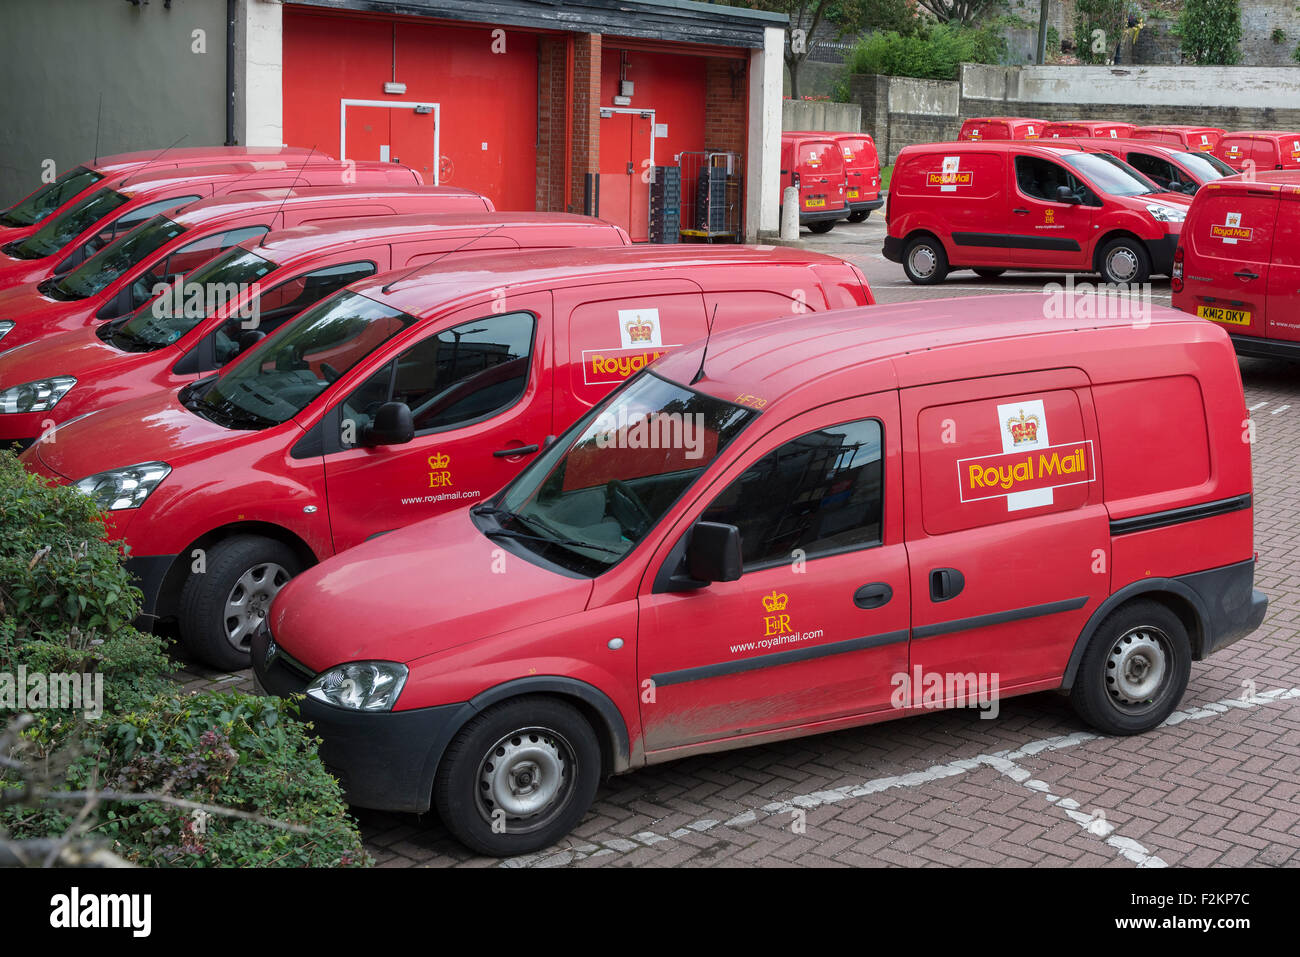 Royal Mail post office delivery vans. Fleet Stock Photo - Alamy